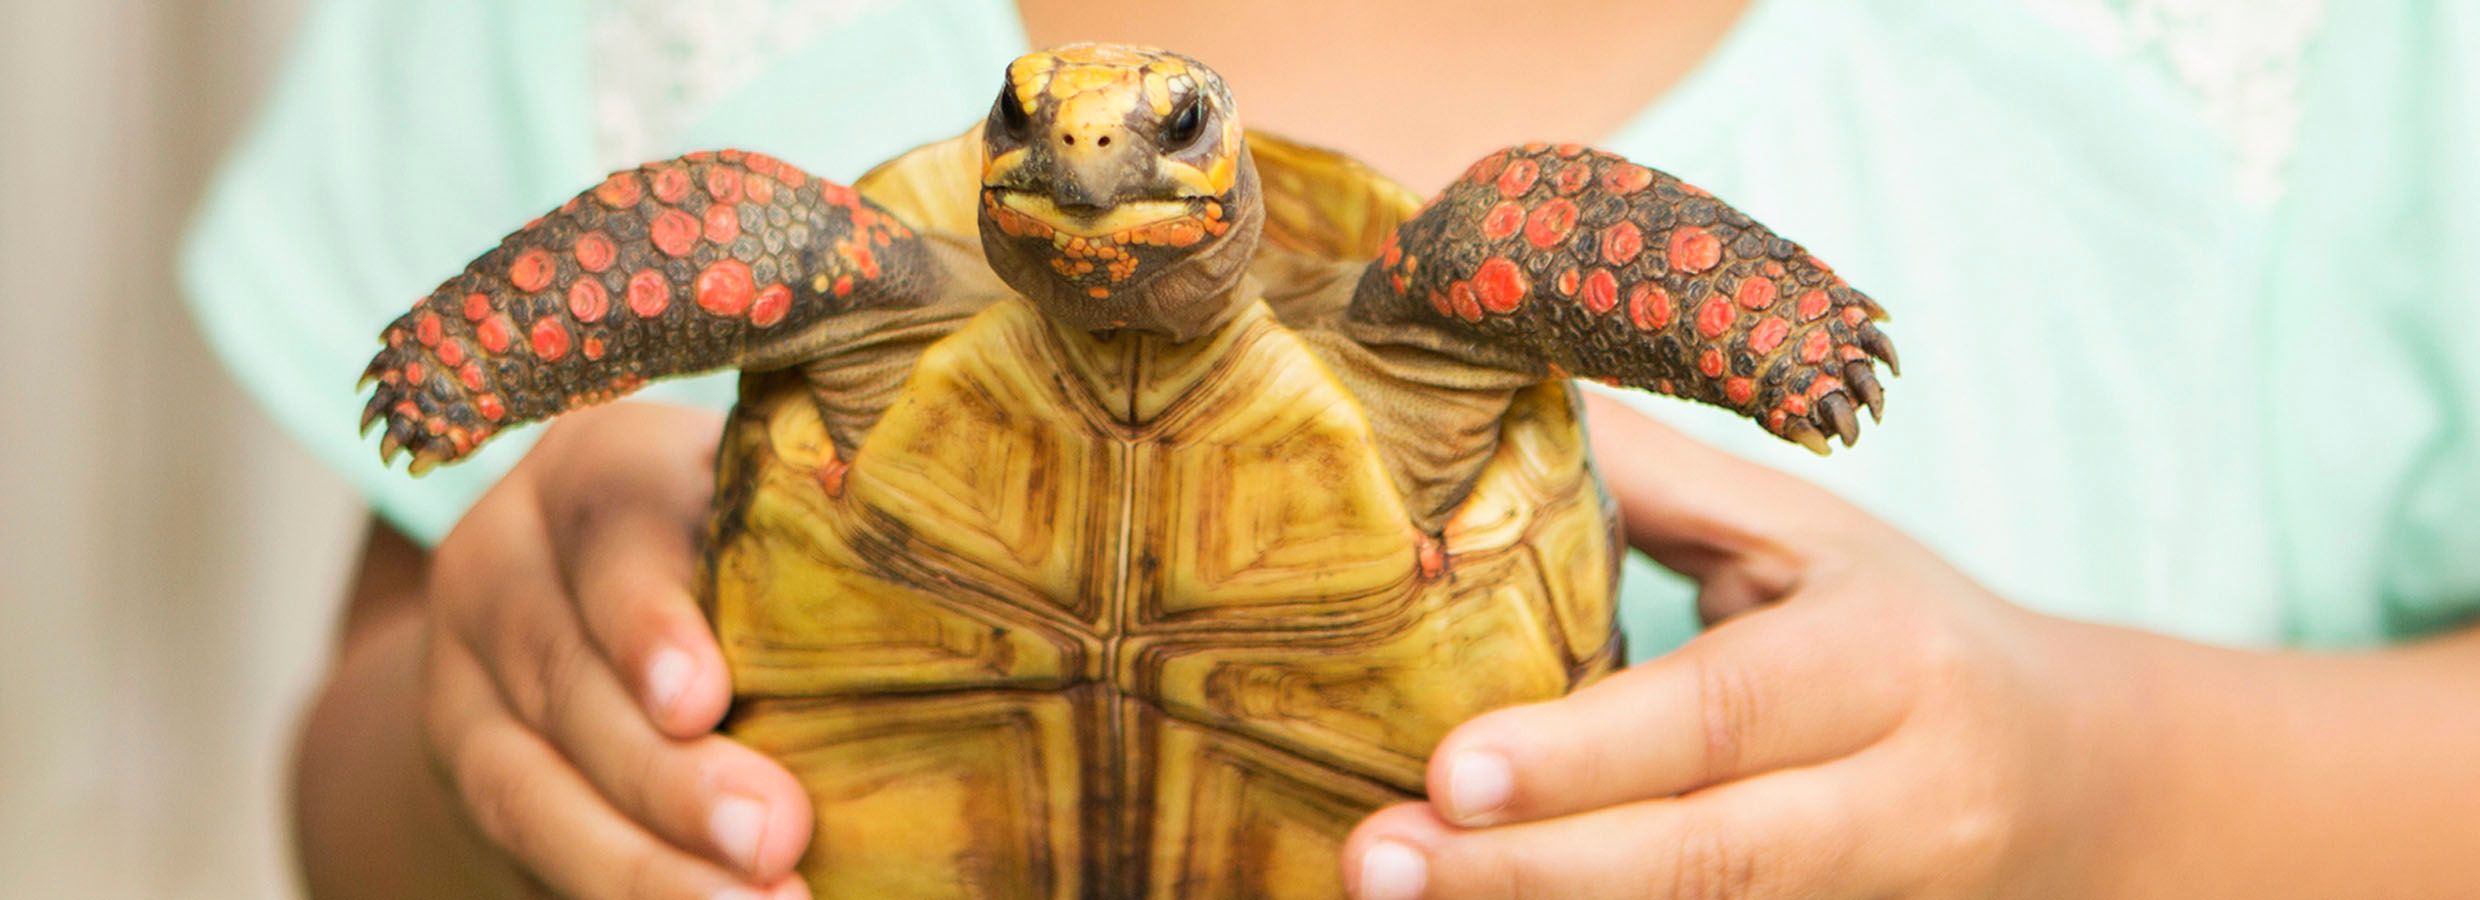 Turtle Shell Care